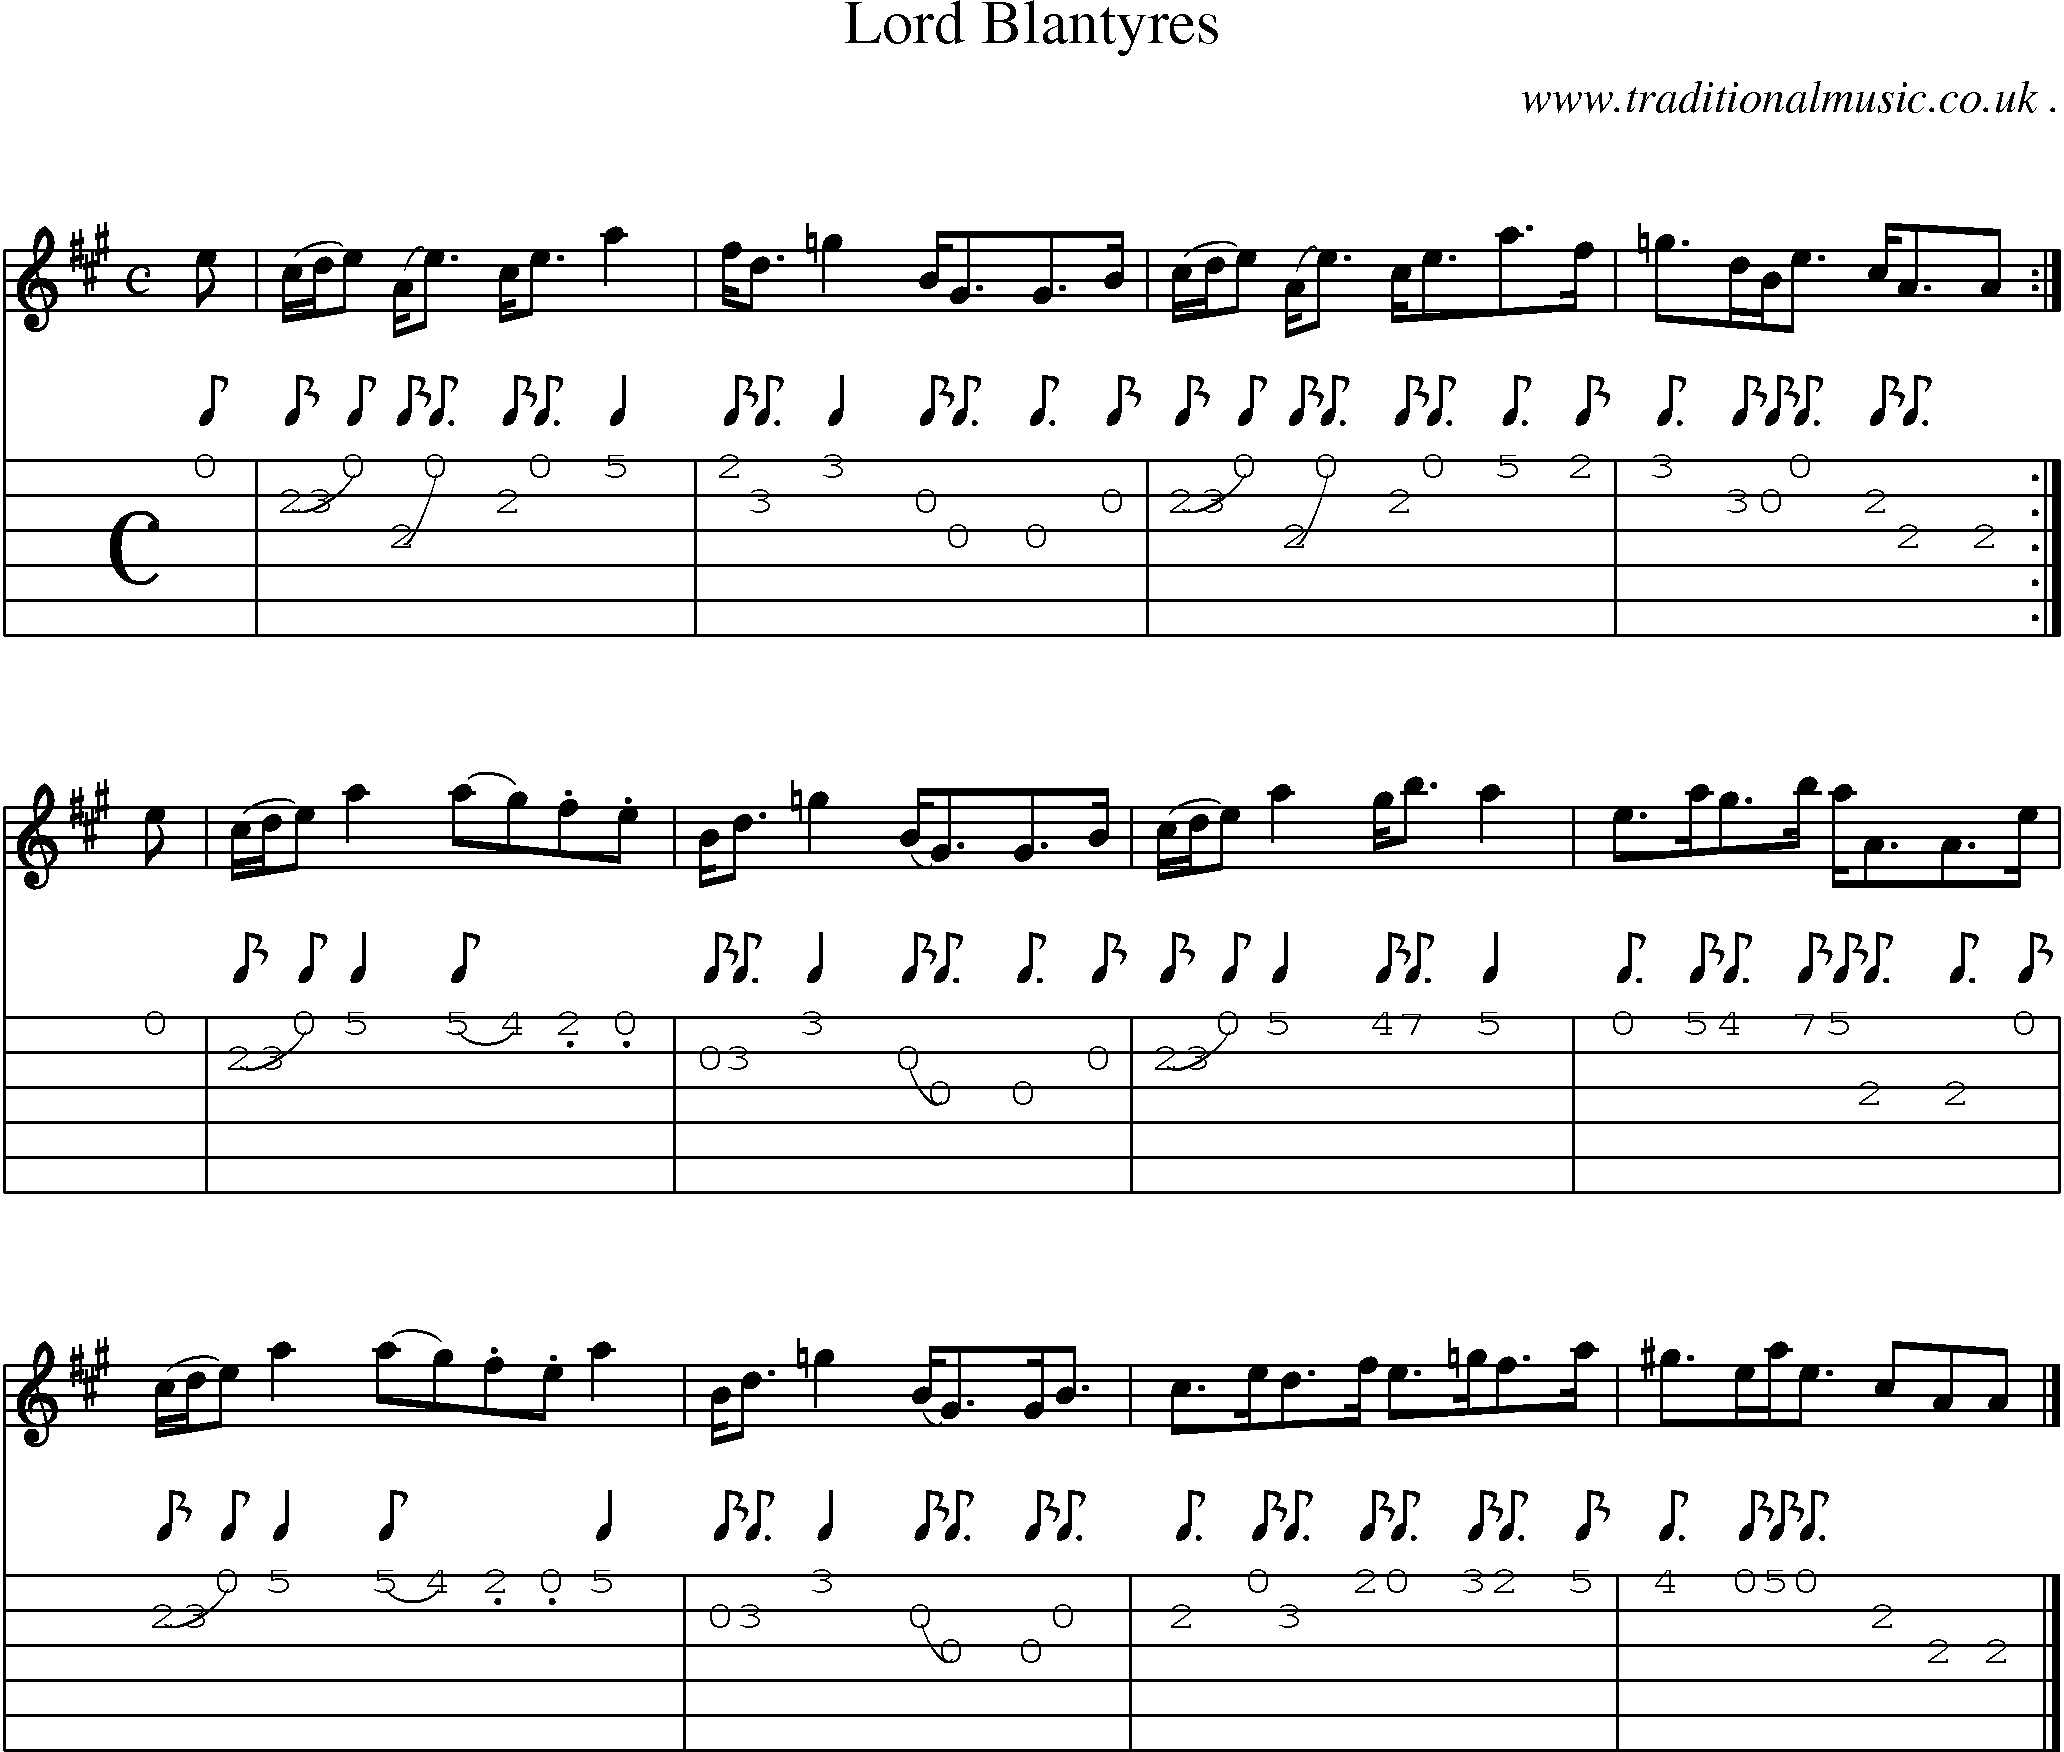 Sheet-music  score, Chords and Guitar Tabs for Lord Blantyres